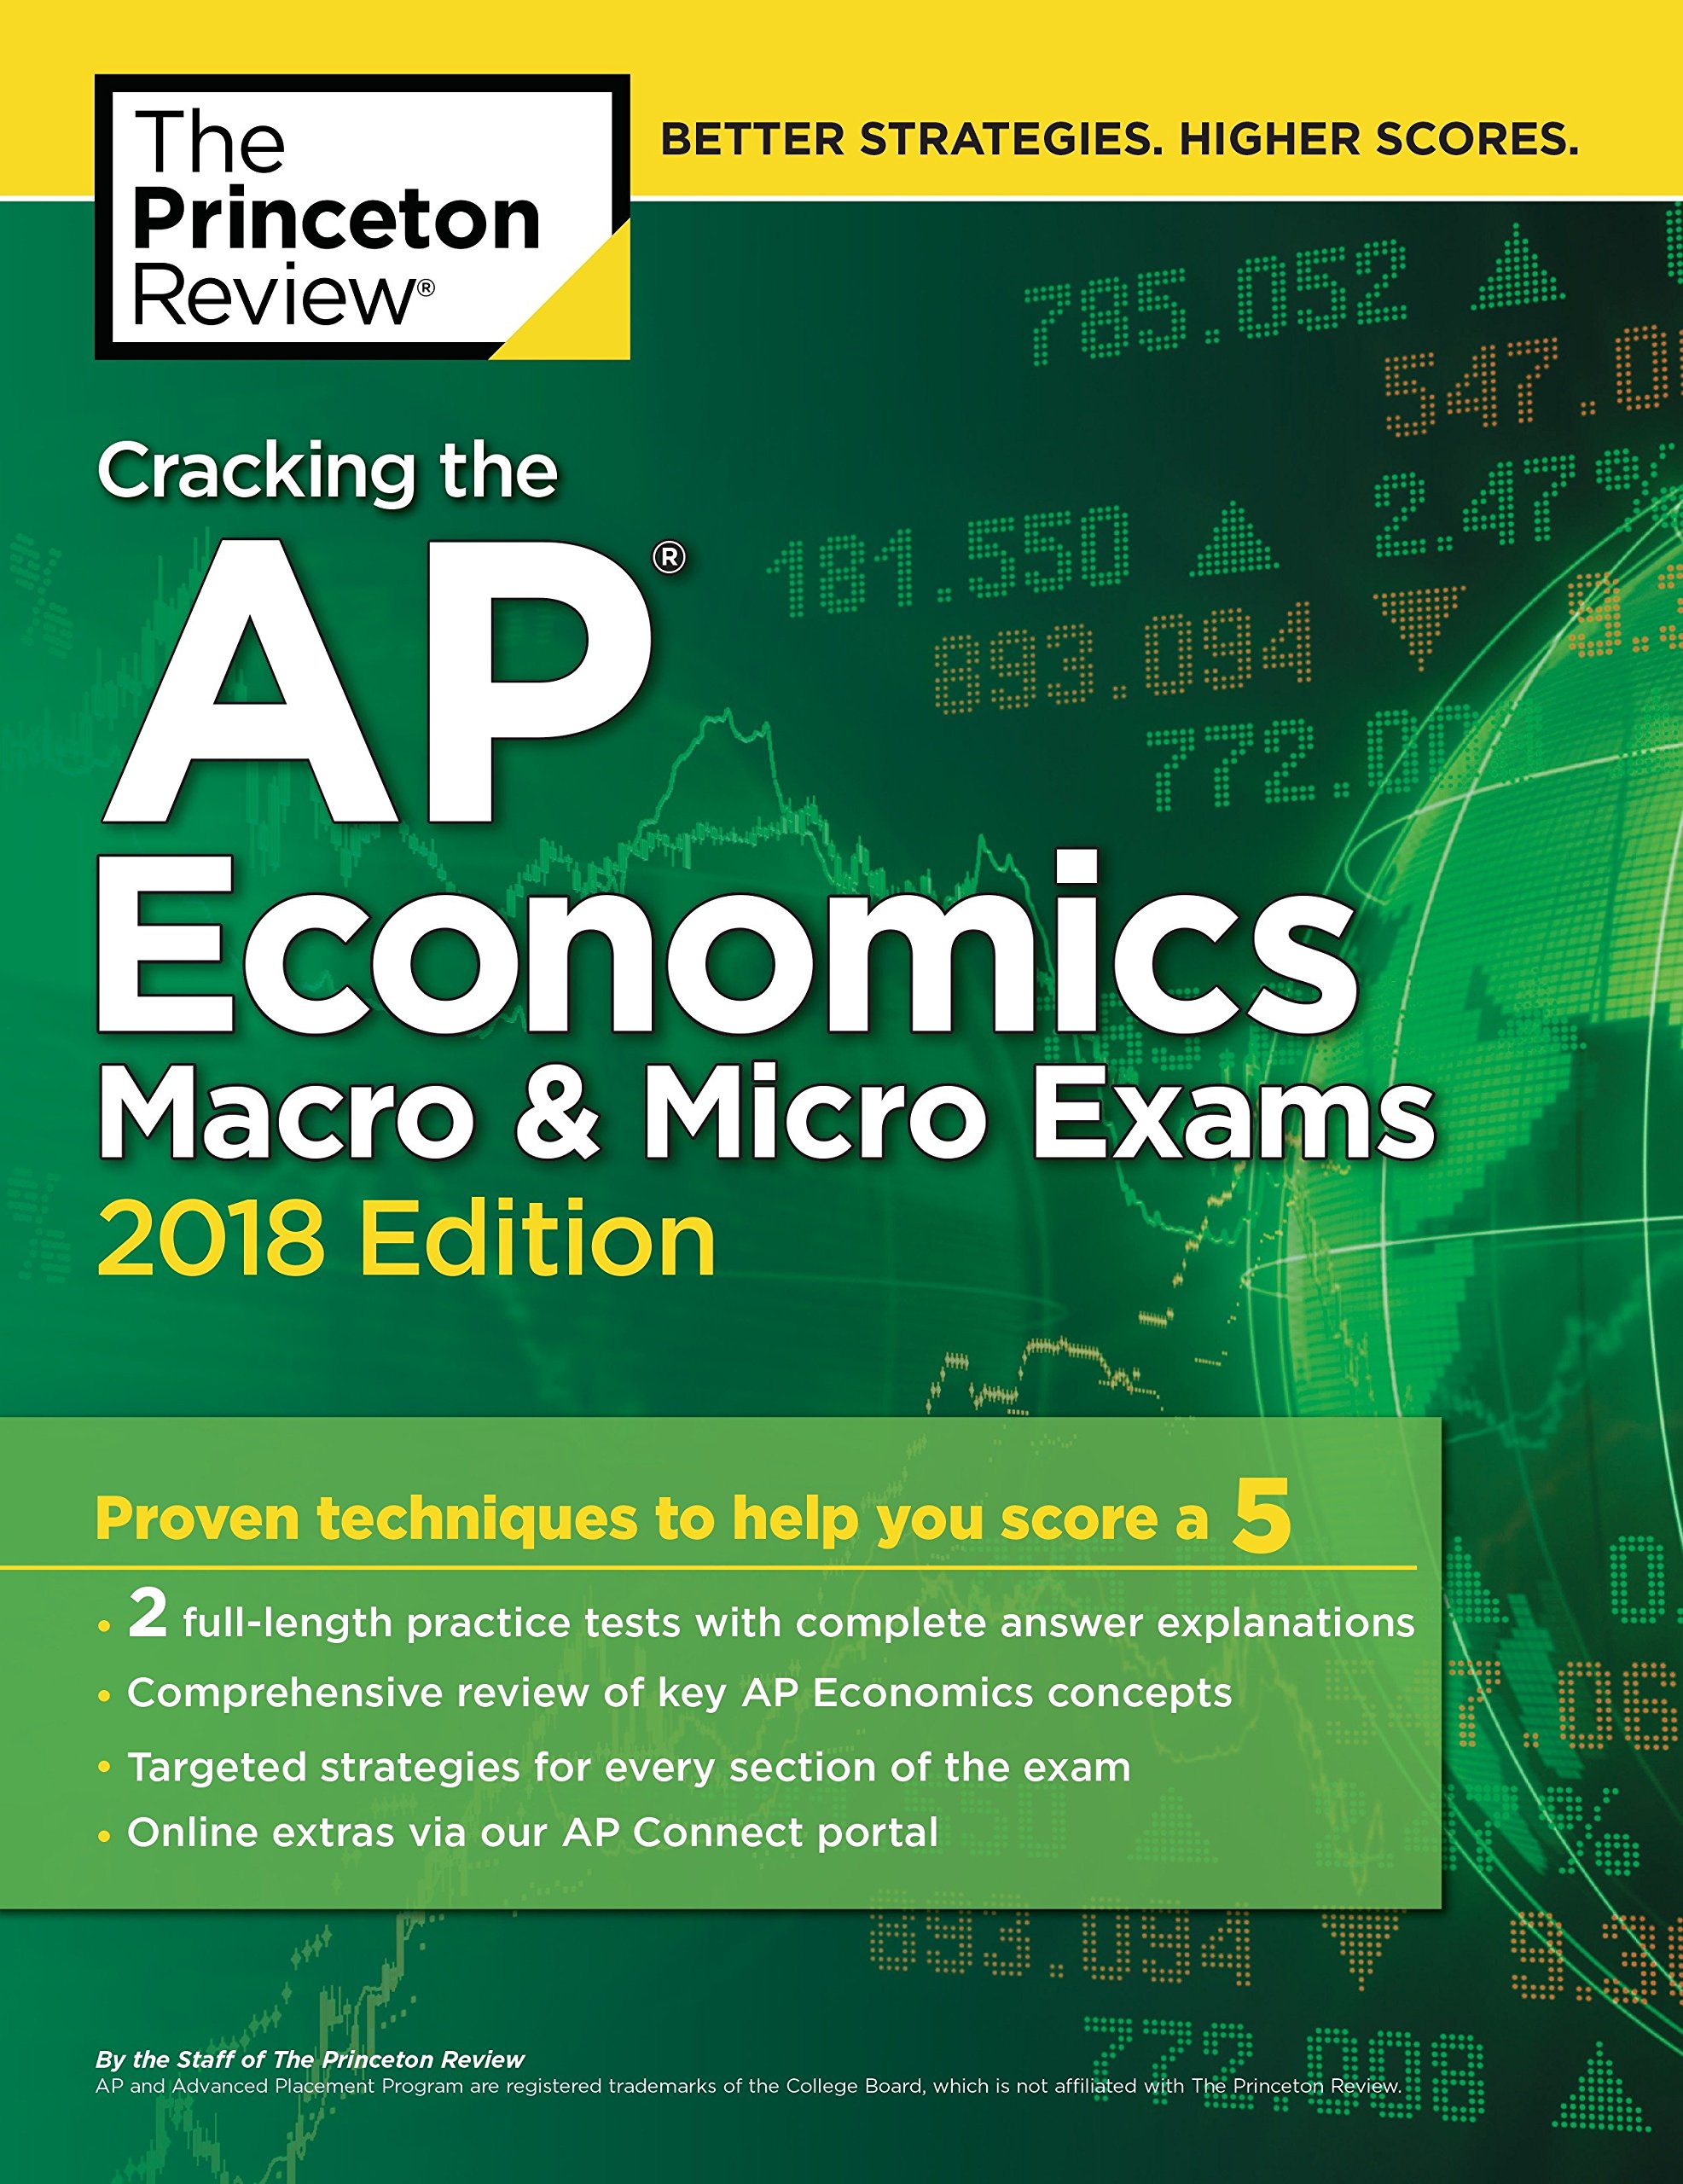 Cracking the AP Economics Macro & Micro Exams, 2018 Edition: Proven Techniques to Help You Score a 5 (College Test Preparation)